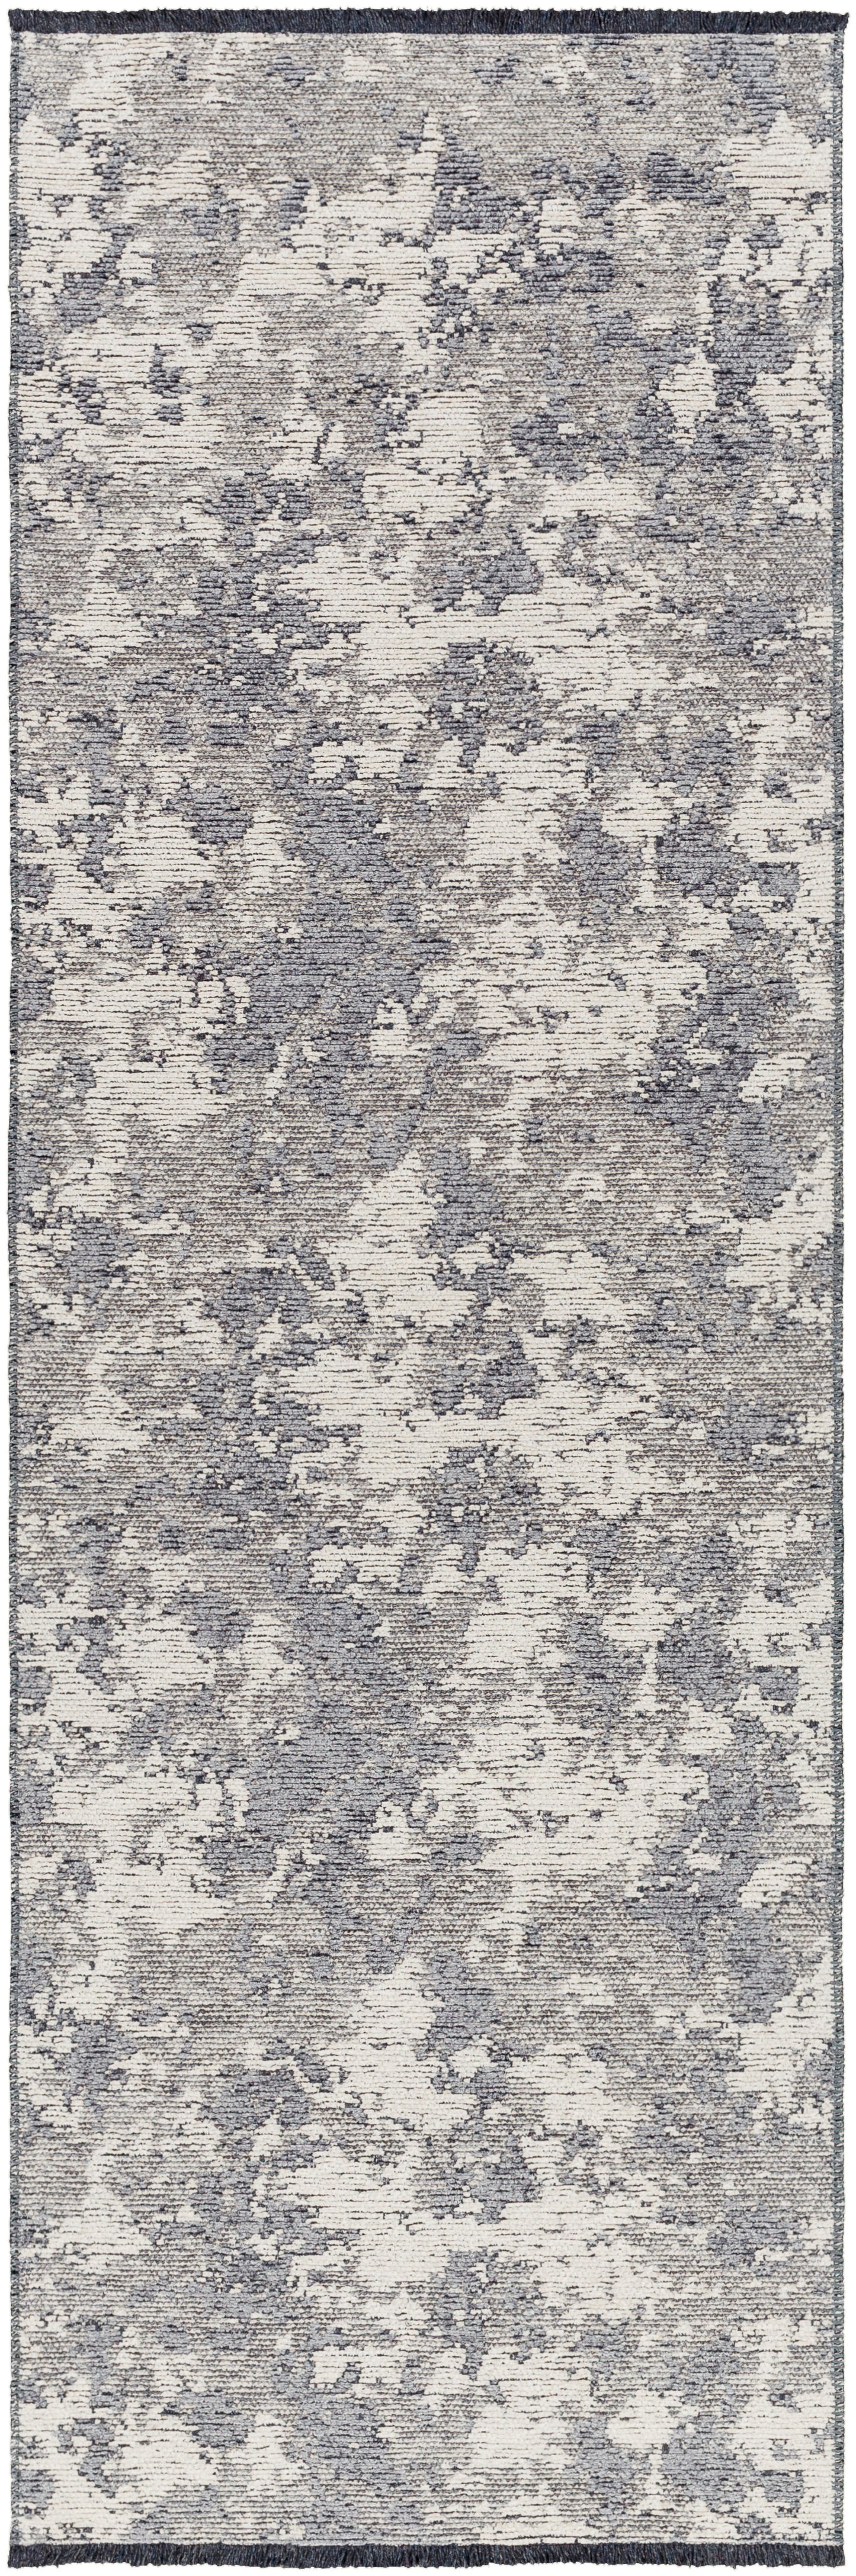 Toscana 30985 Machine Woven Synthetic Blend Indoor Area Rug by Surya Rugs